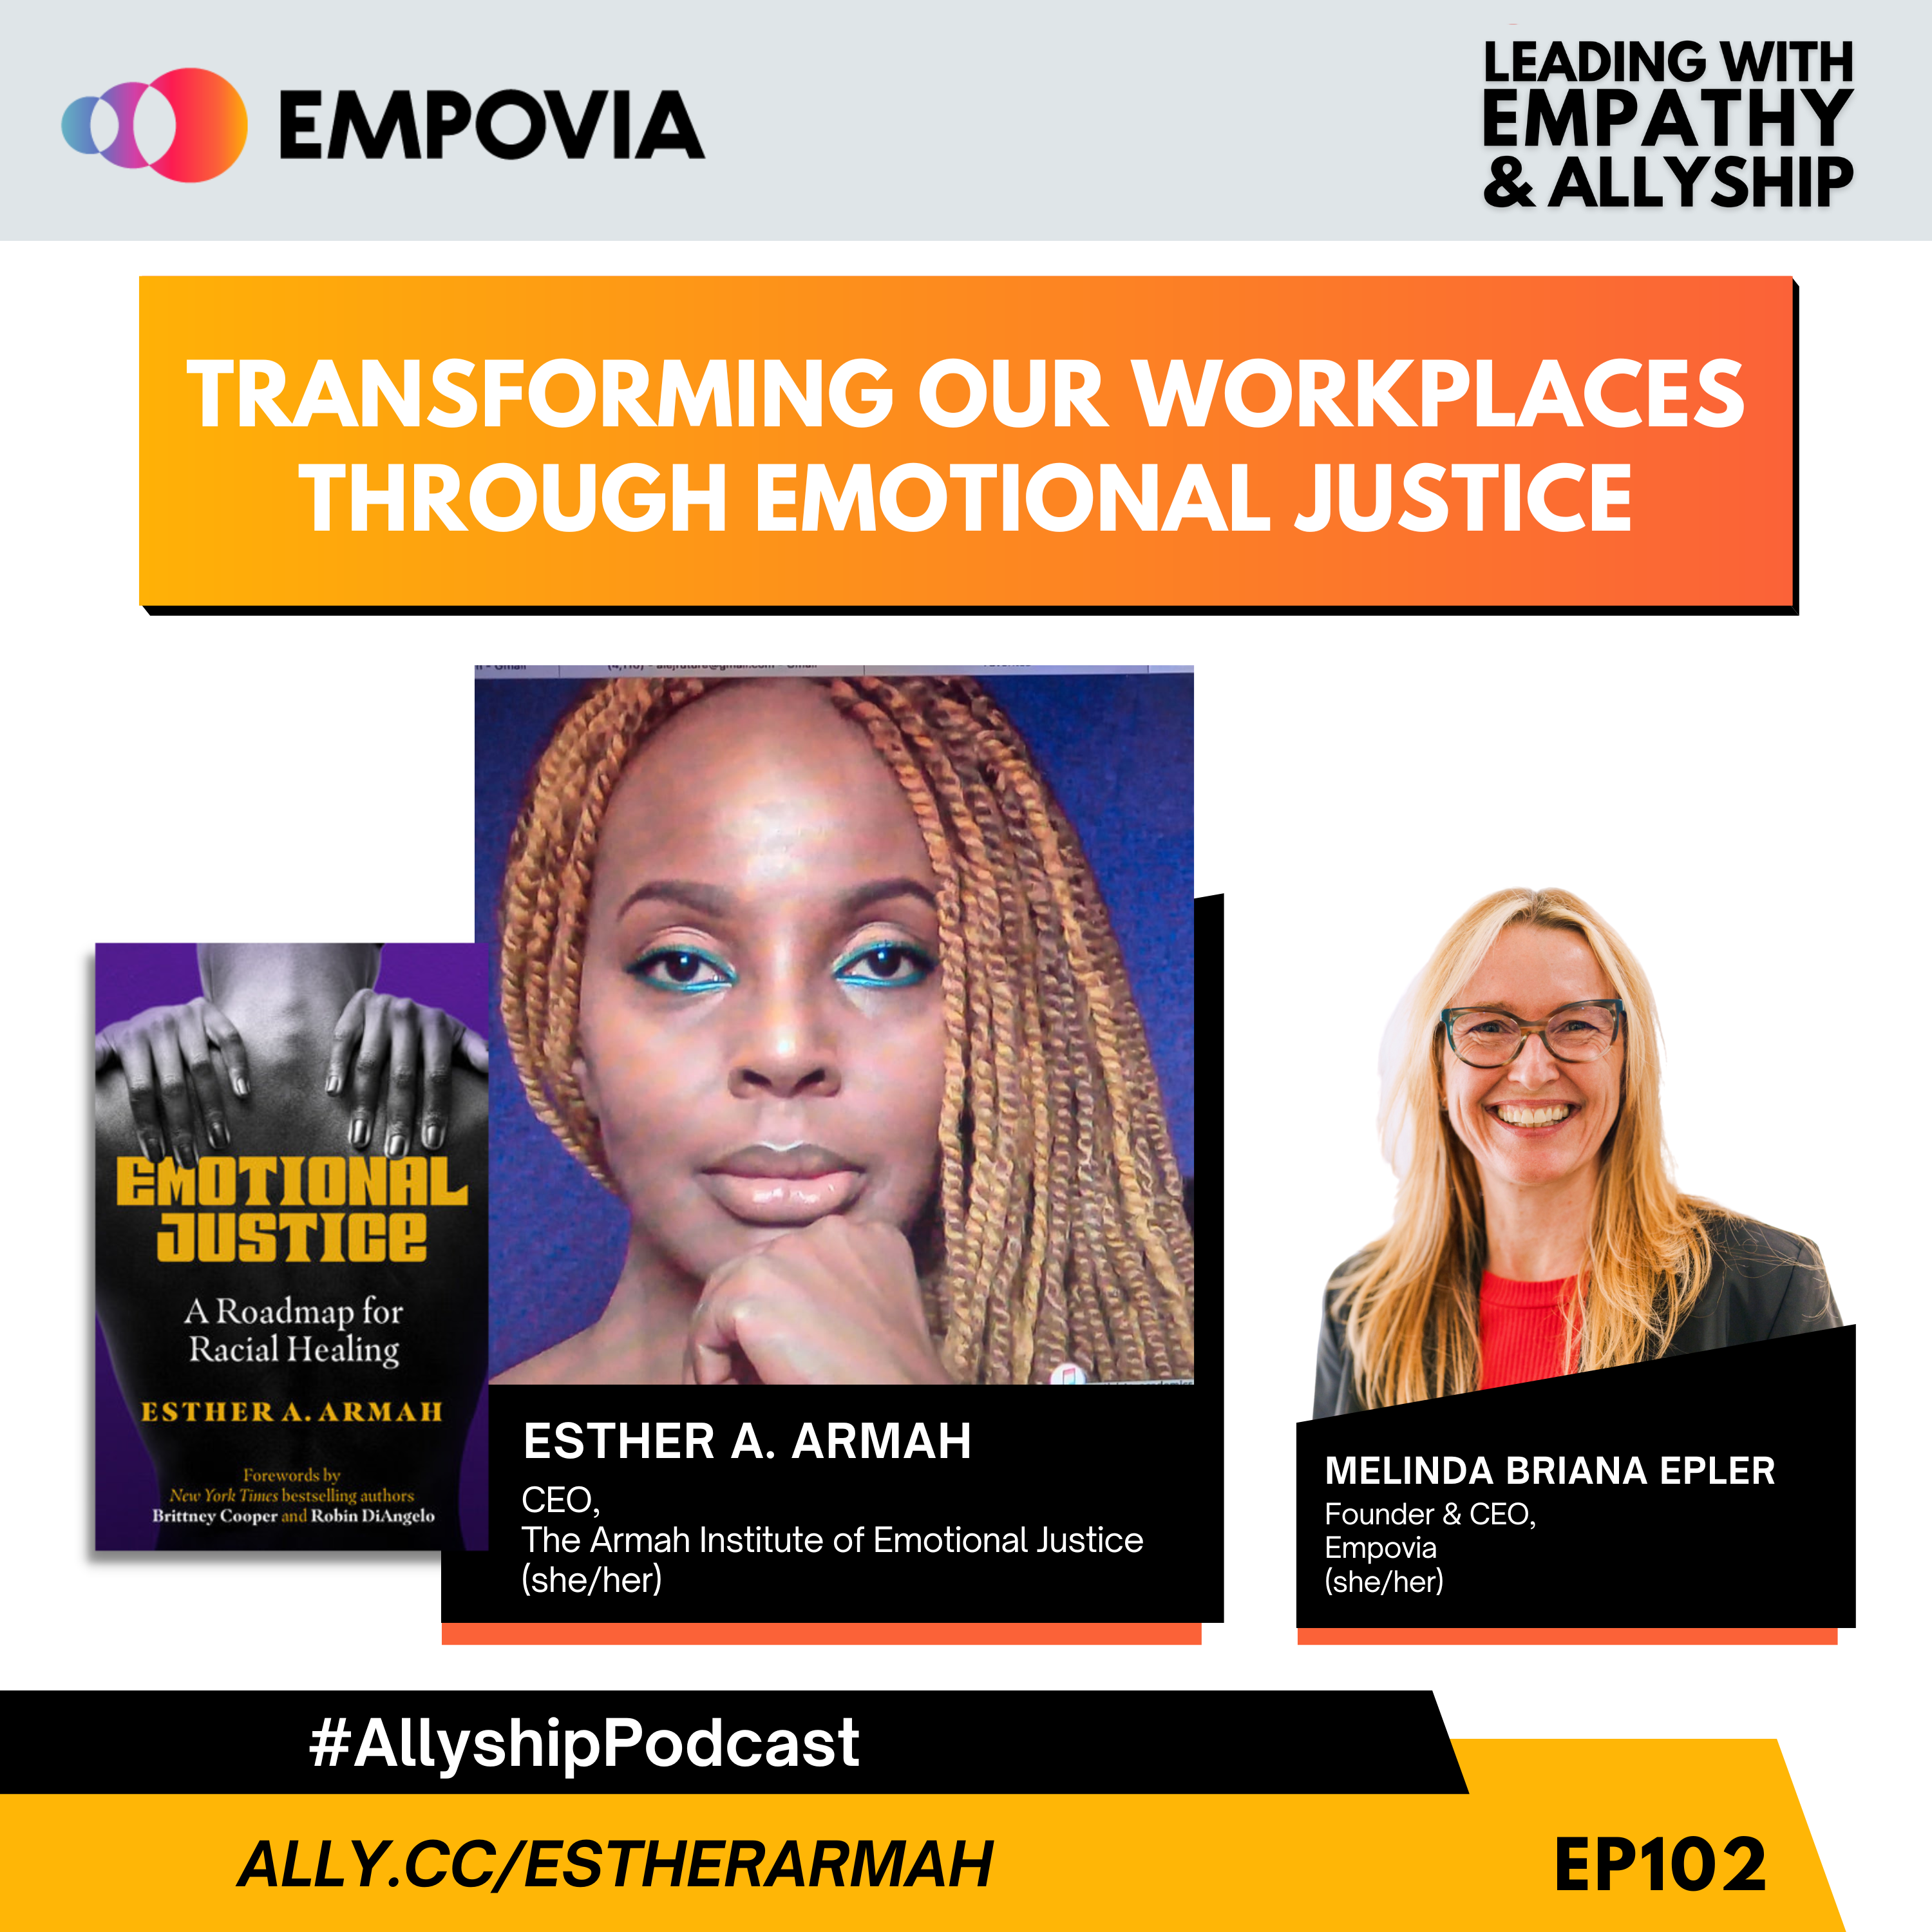 Leading With Empathy & Allyship promo and photos of Esther A. Armah, a global Black chick with aqua blue eye makeup and long bronze twists; beside her is the purple book cover of EMOTIONAL JUSTICE: A Roadmap for Racial Healing; and host Melinda Briana Epler, a White woman with blonde and red hair, glasses, red shirt, and black jacket.